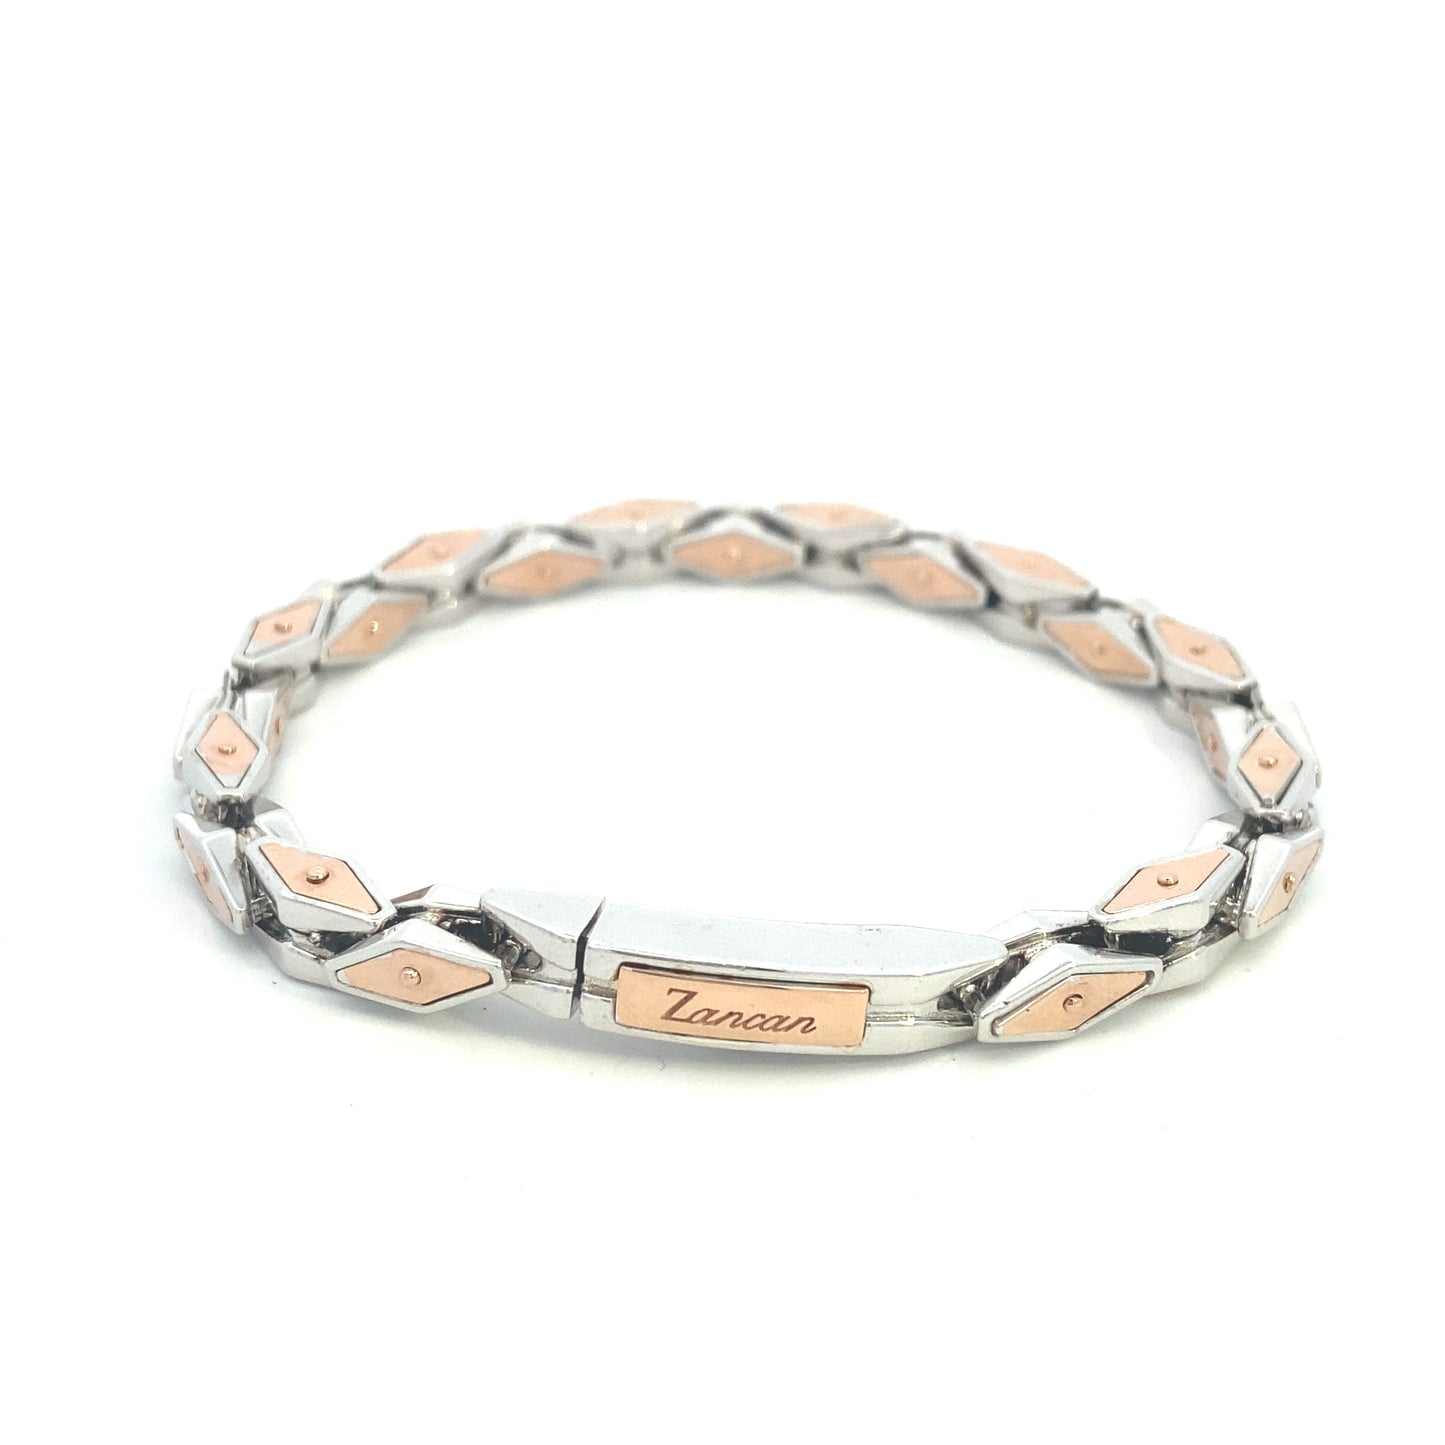 Dimond Style Silver and Rose Gold Bracelet | Zancan | Luby 